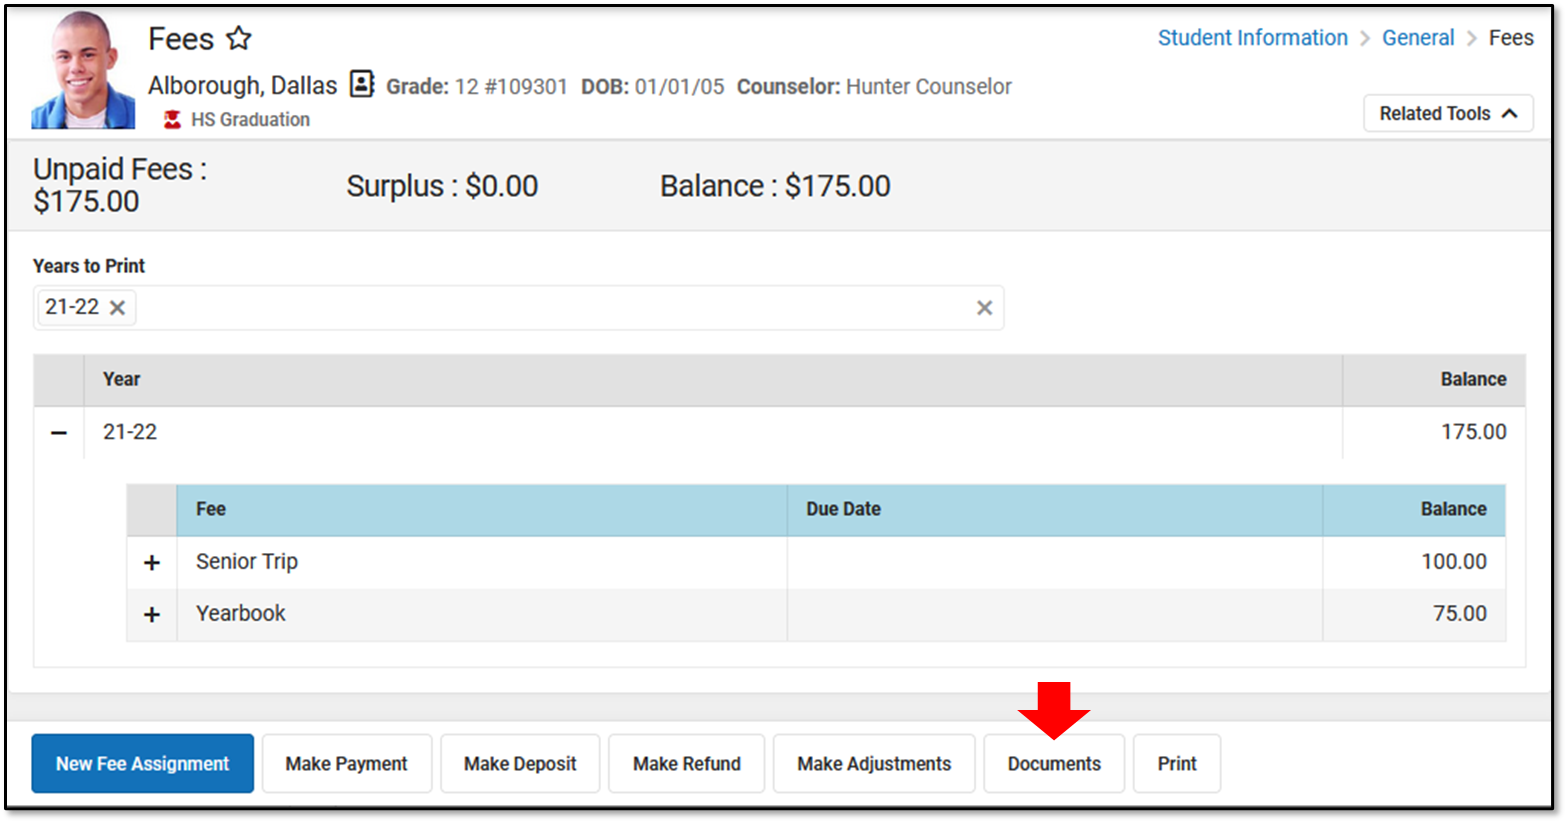 Screenshot of the Fees editor. The Documents button appears at the bottom of the window and an arrow is pointing to it.